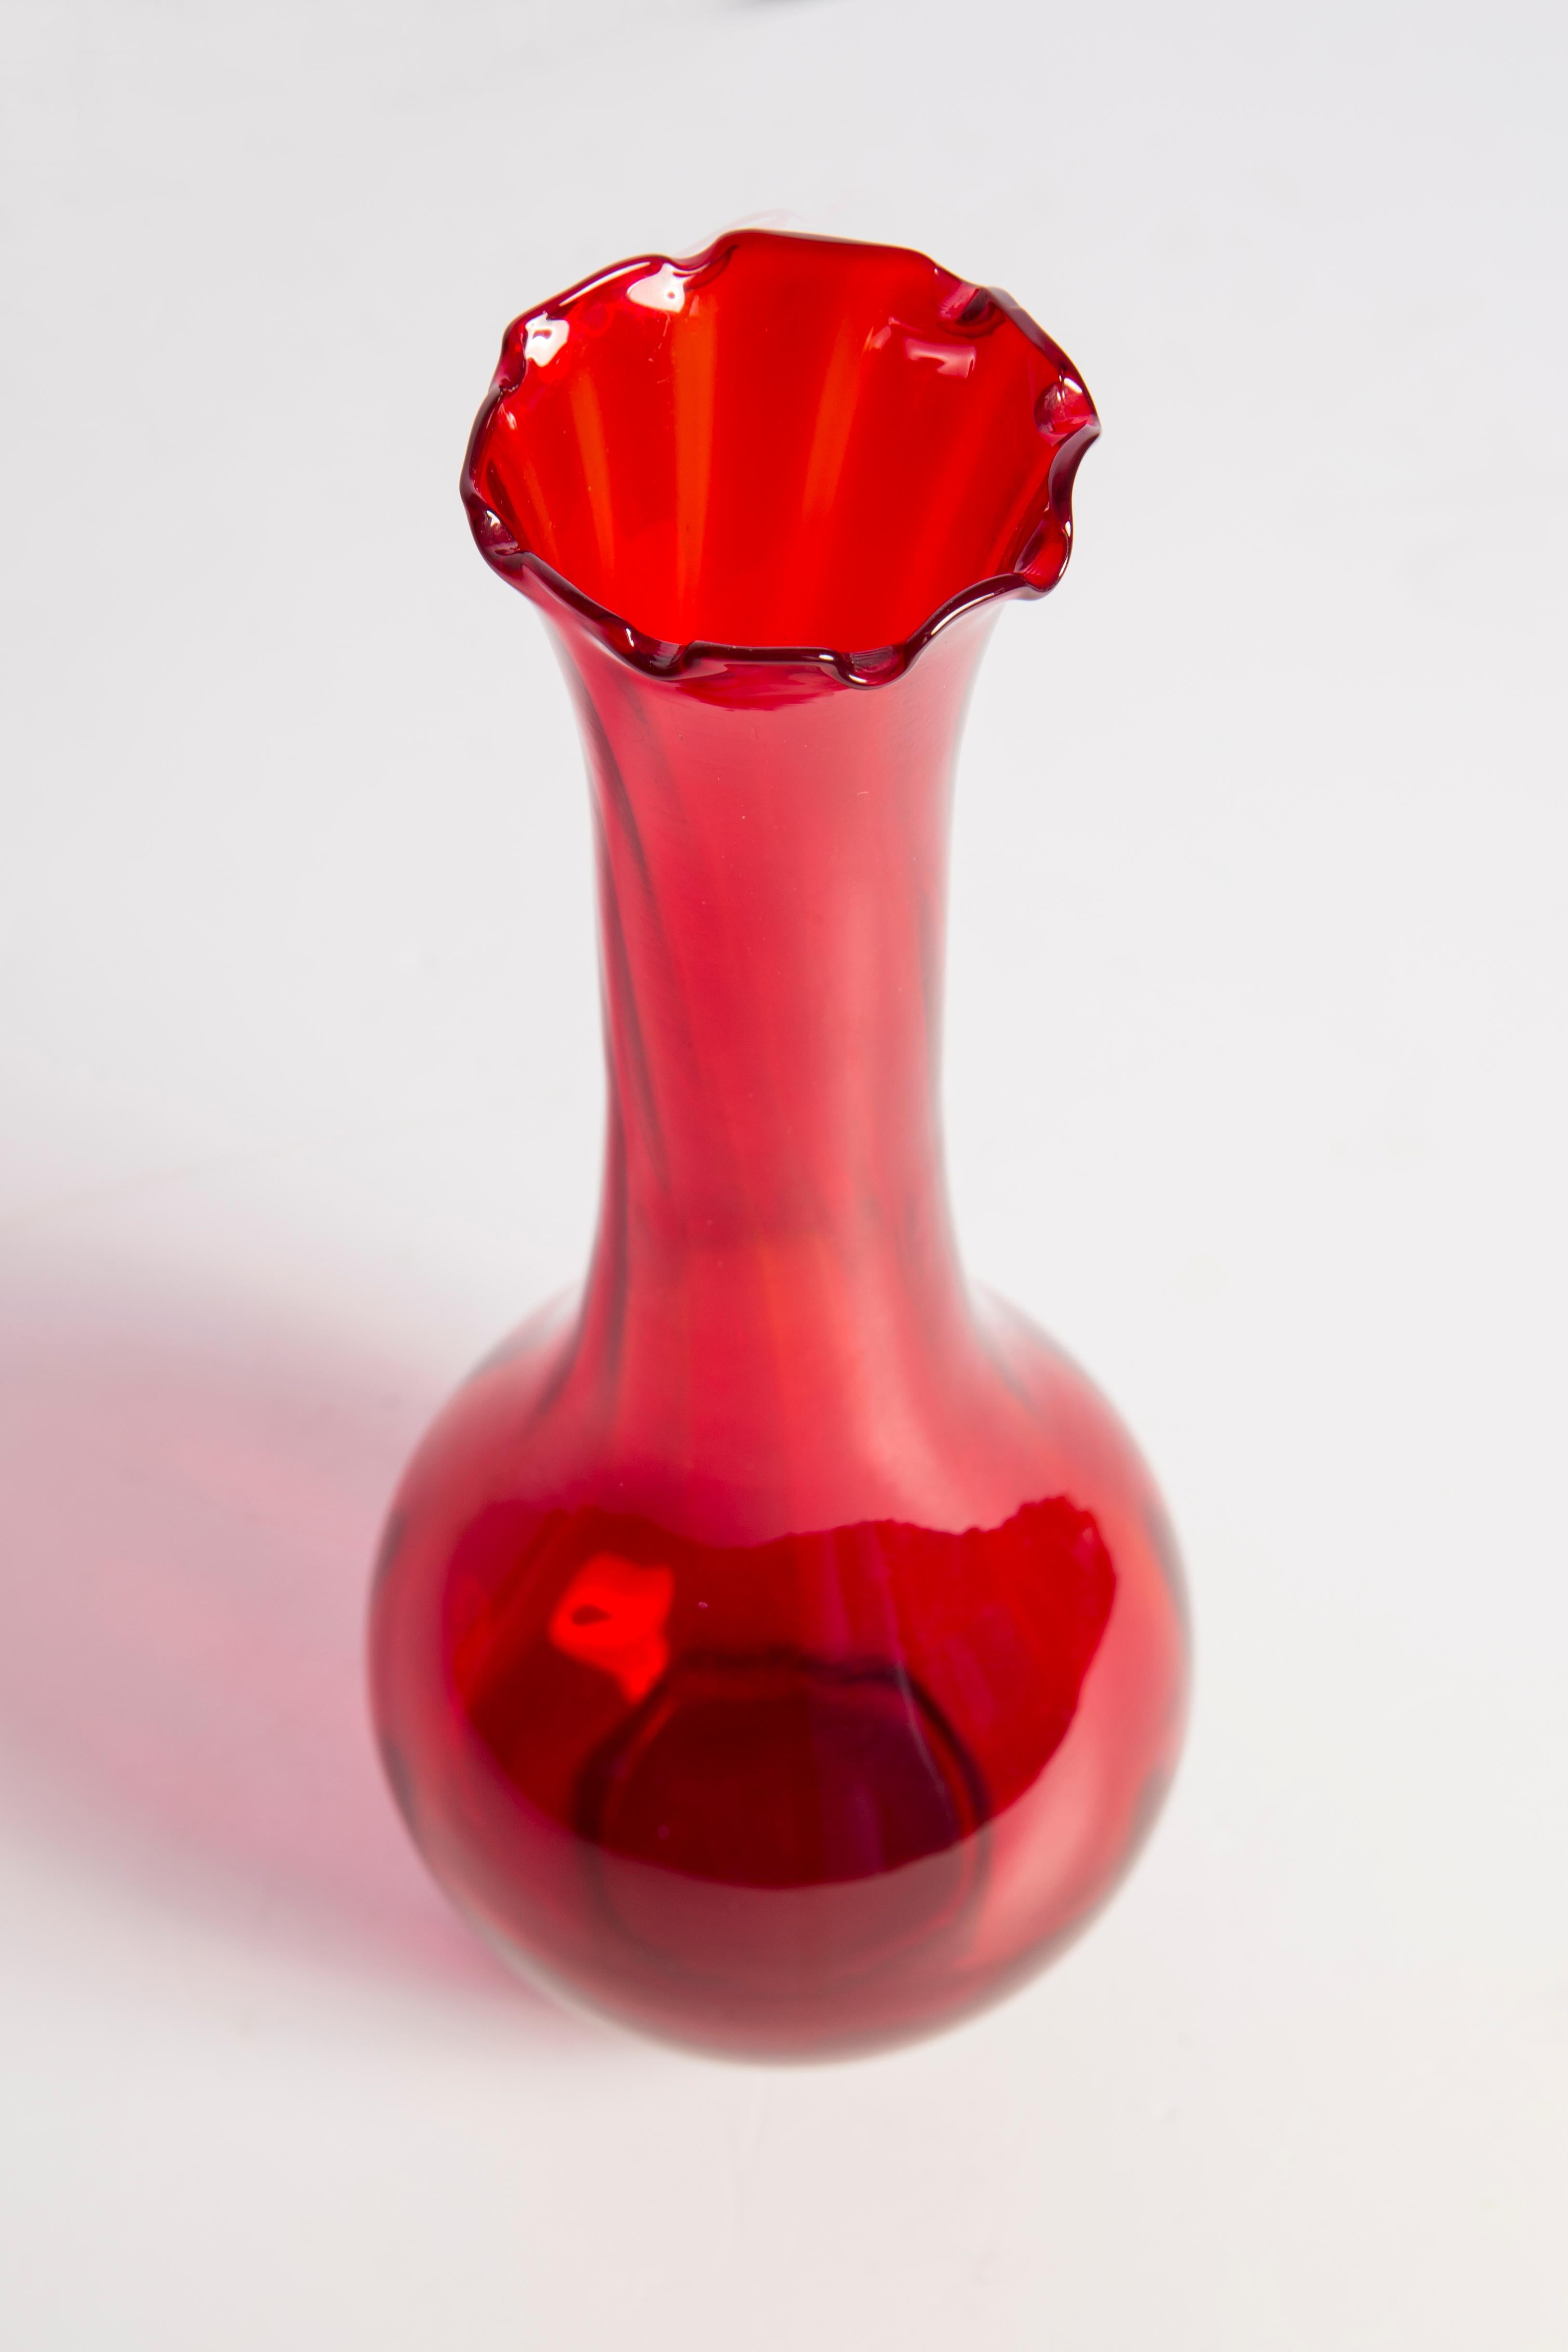 Ceramic Midcentury Glass Red Vase with a Frill, Europe, 1960s For Sale